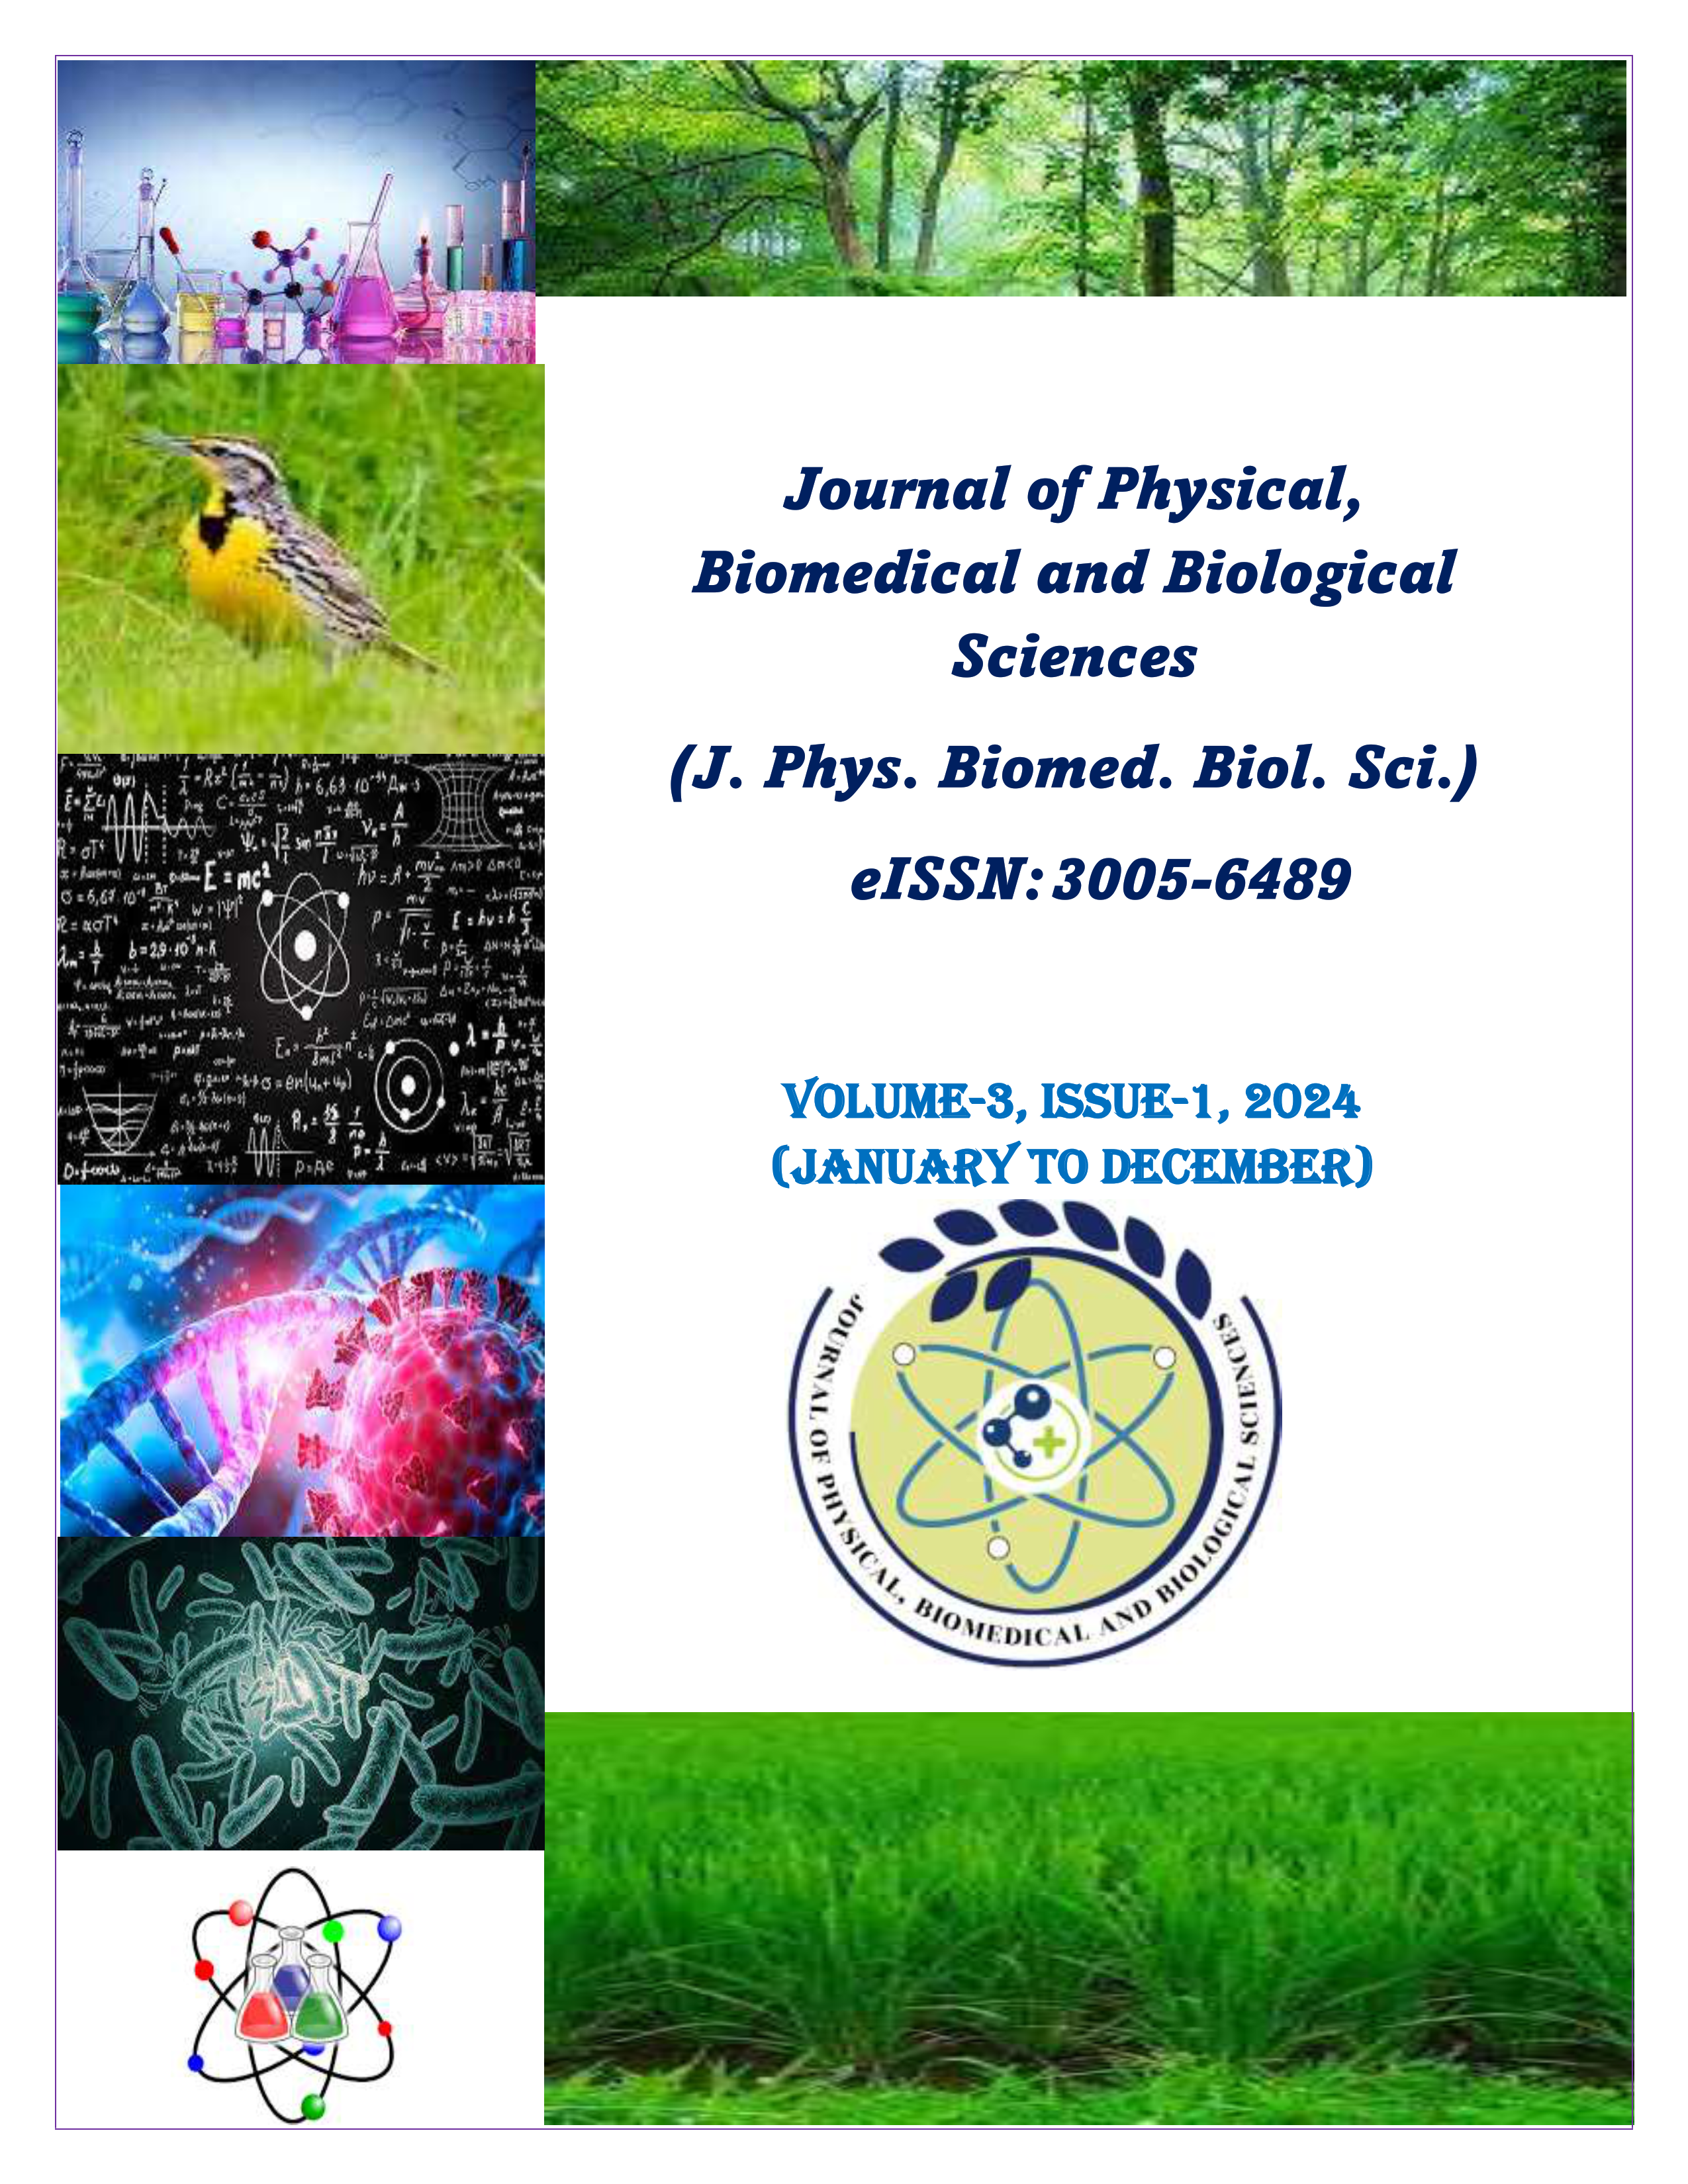 					View Vol. 2024 No. 1 (2024): Volume-3, Issue-1, 2024 (January to December-Current Issue)
				